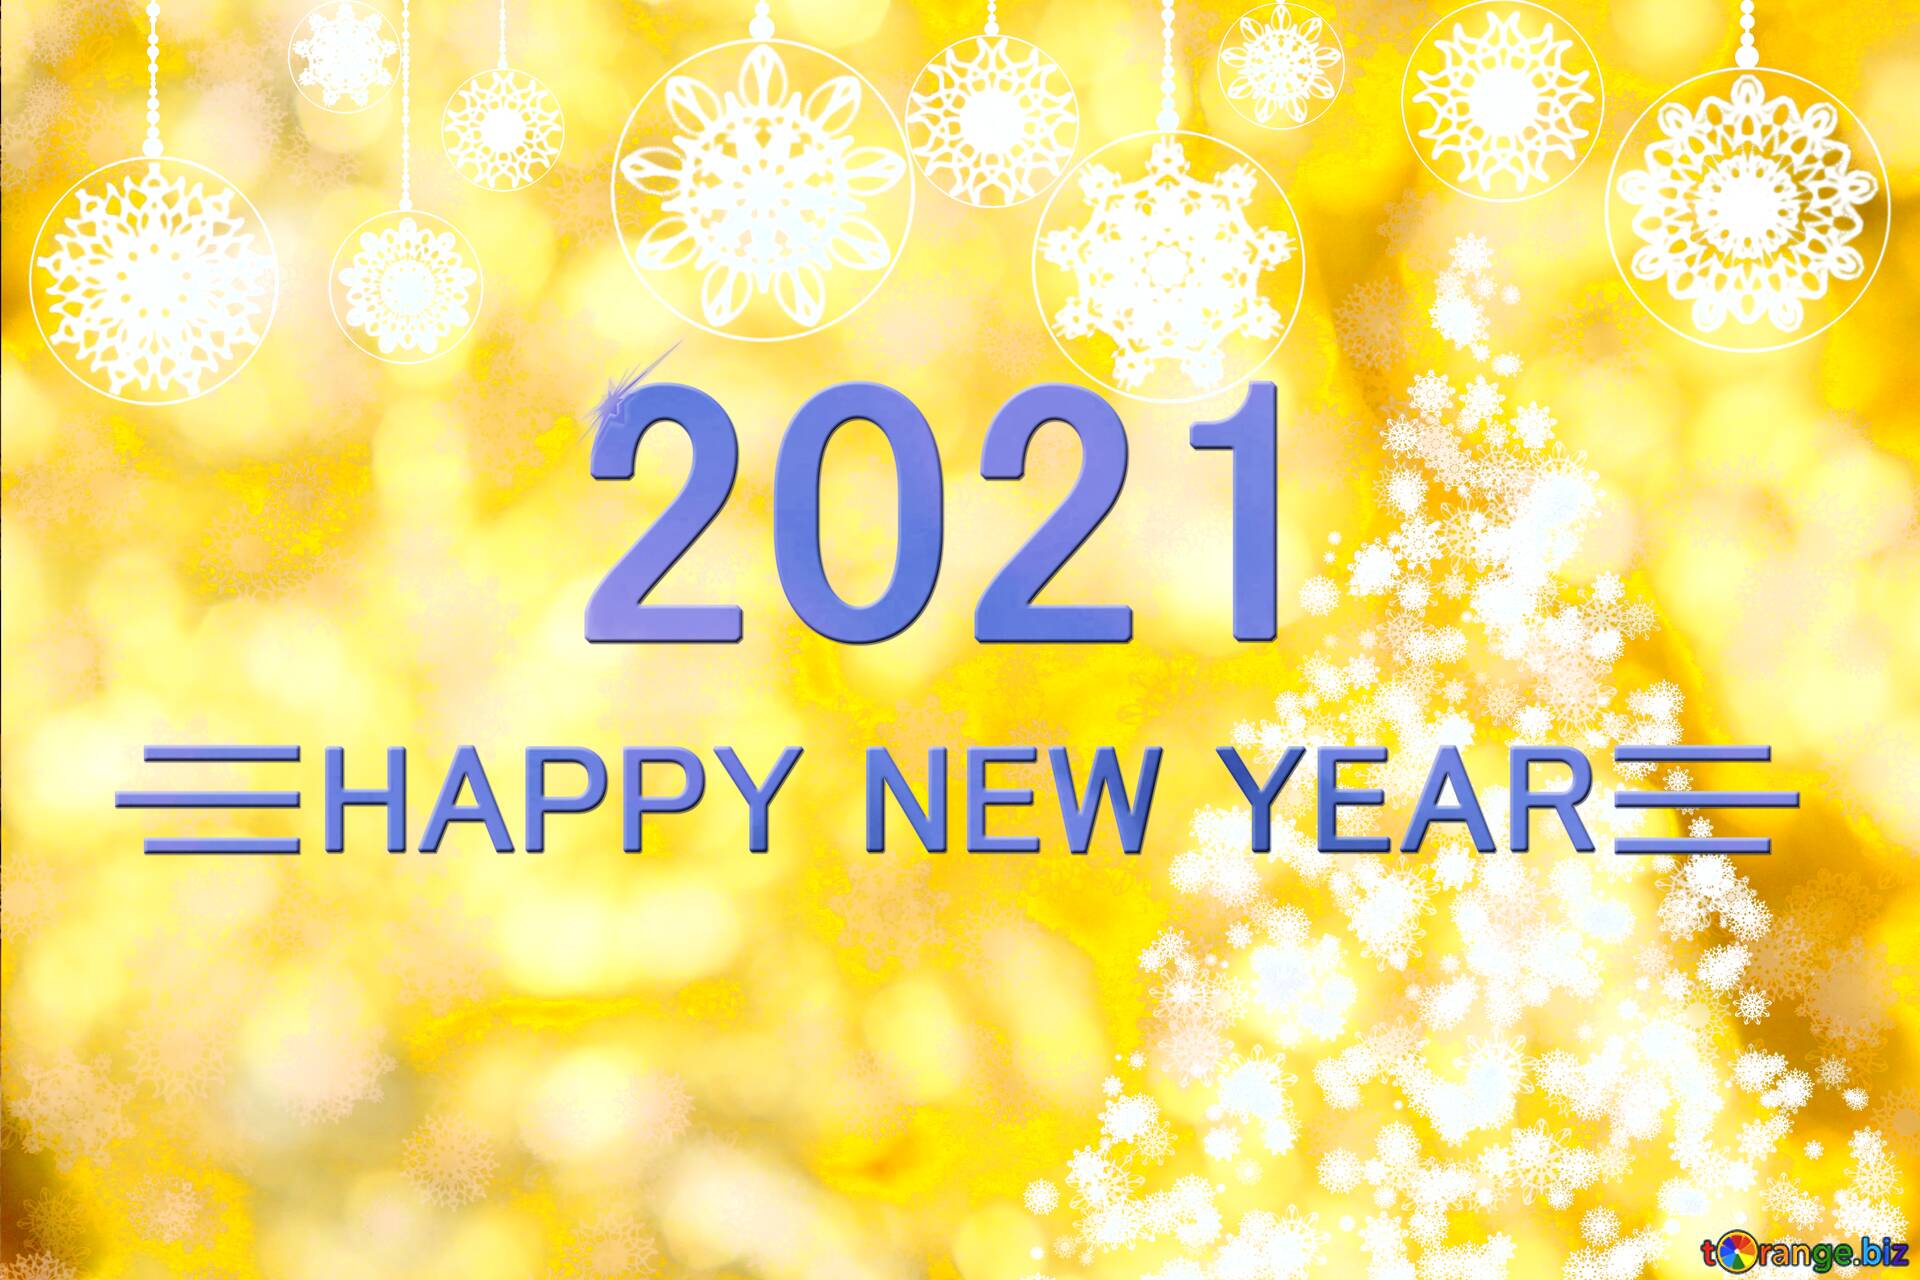 New Year 2021 Wallpapers - Wallpaper Cave